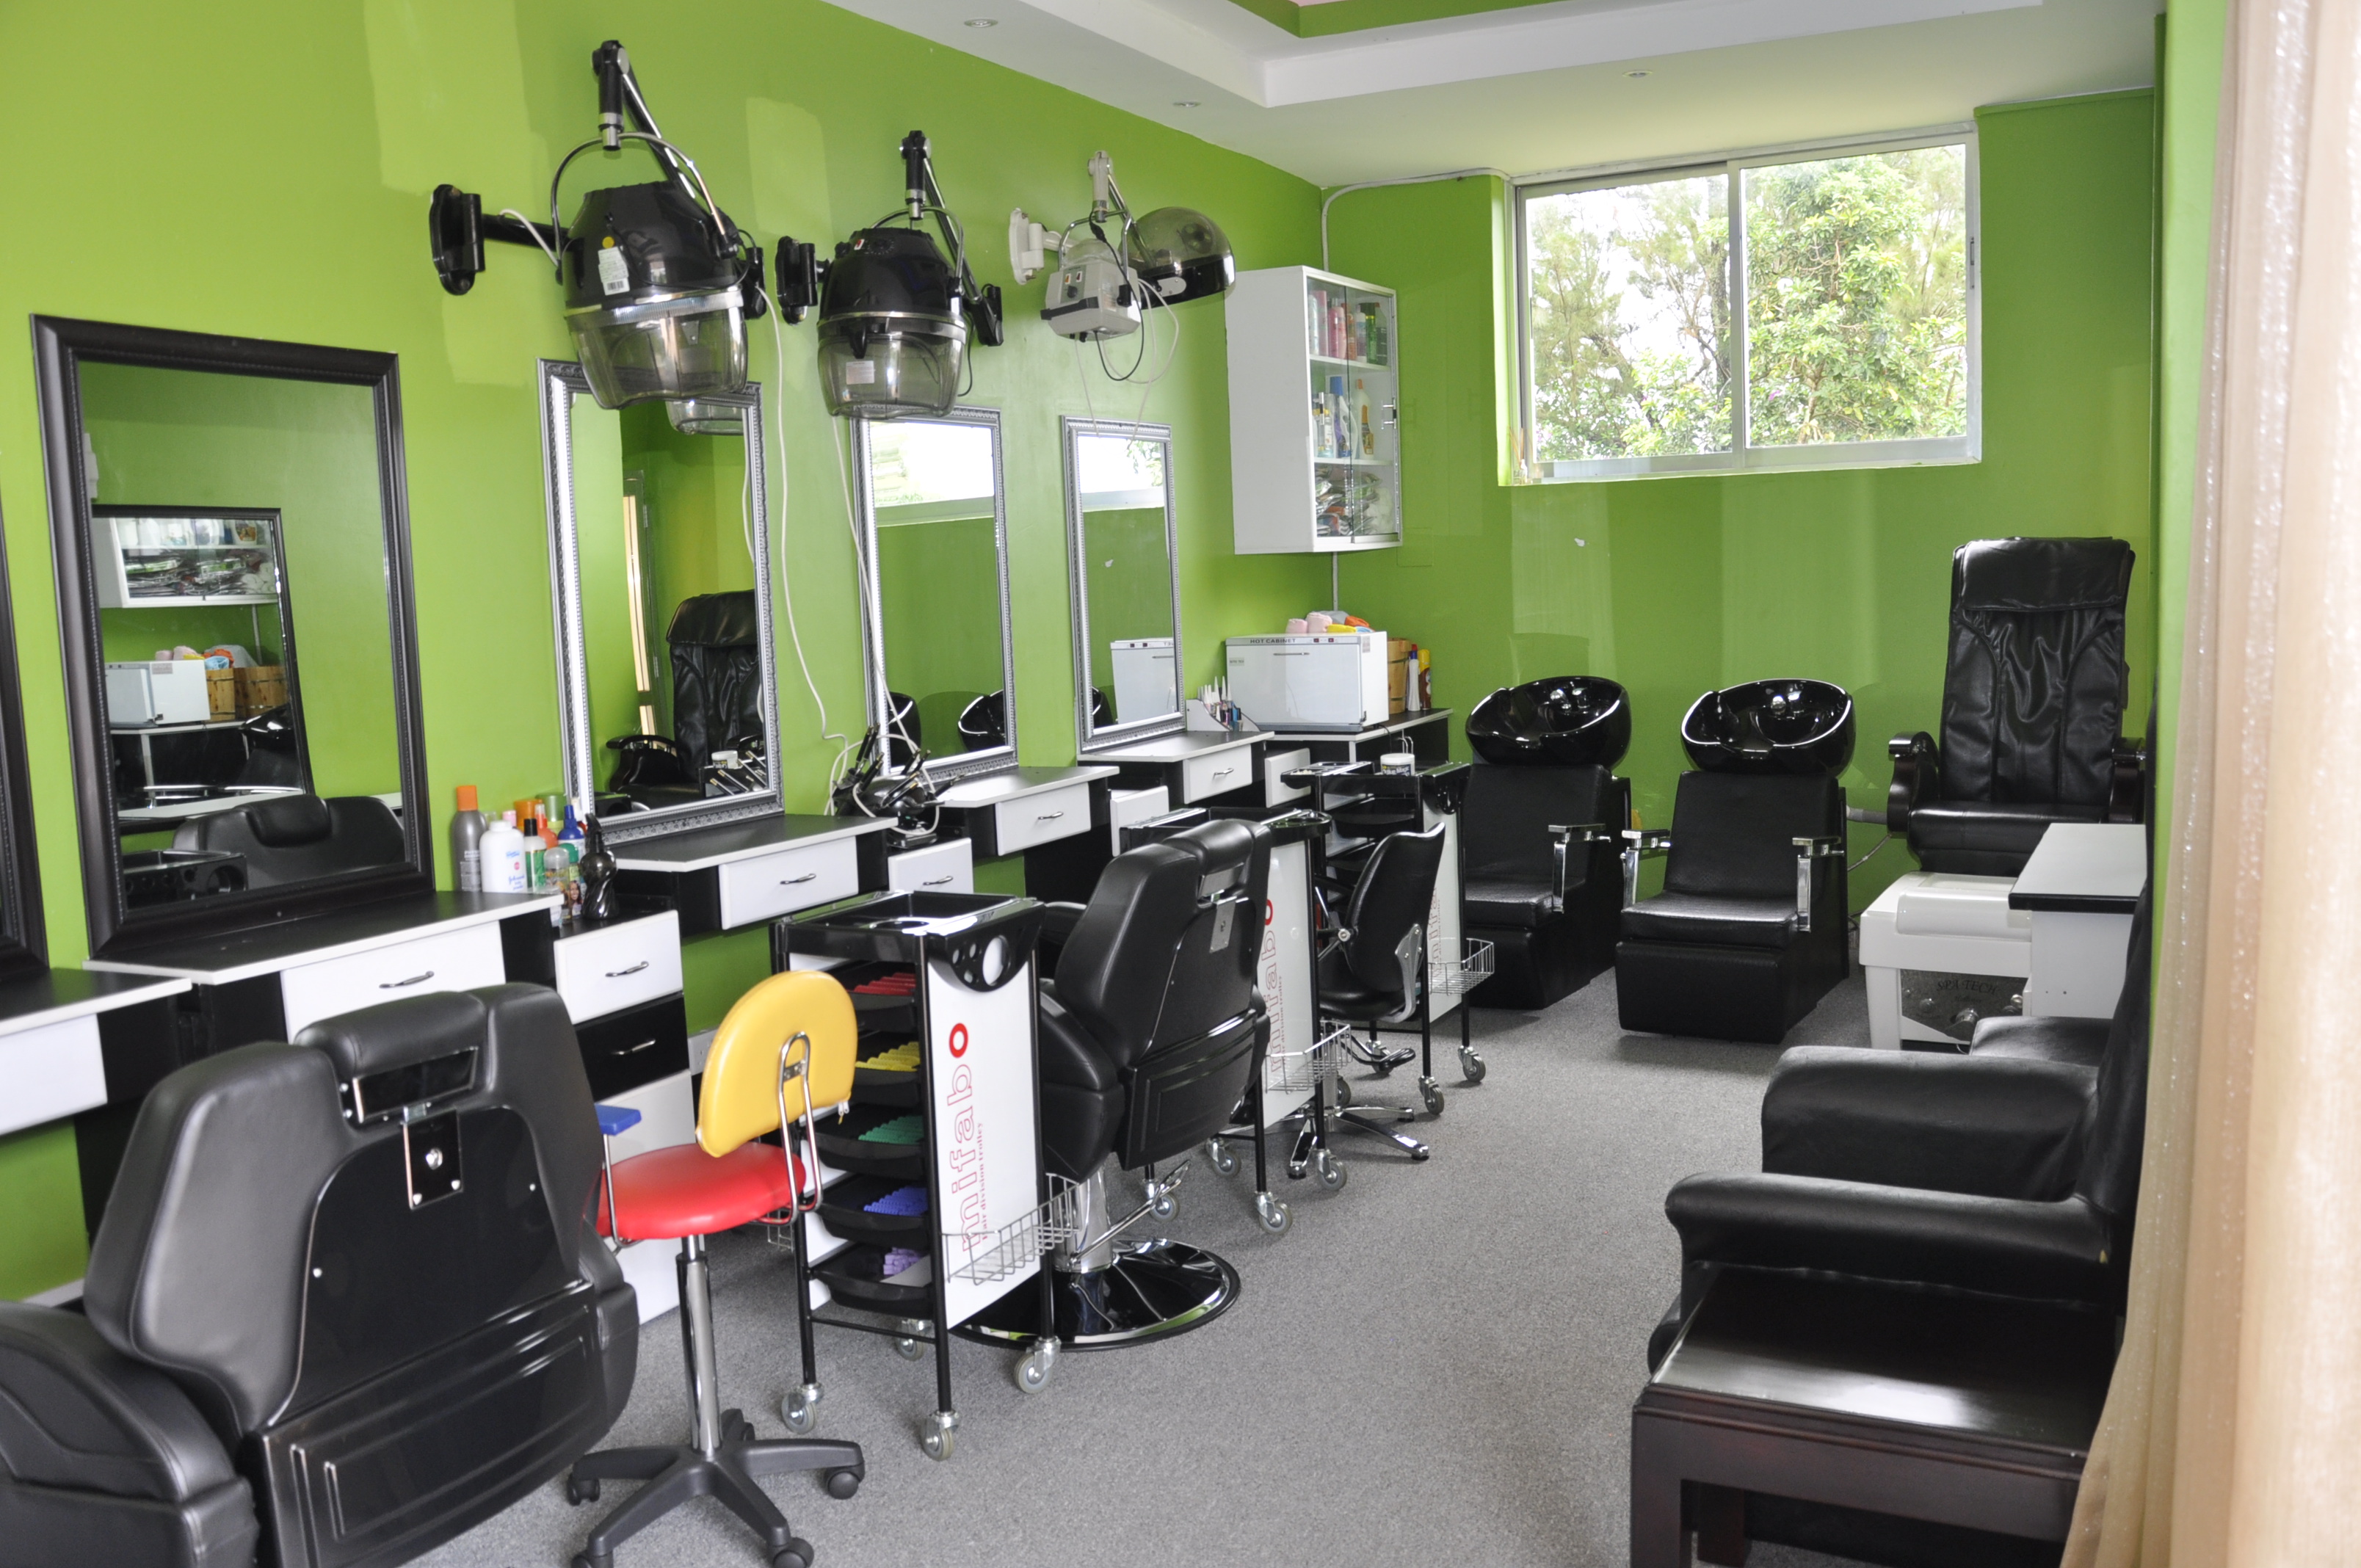 BARBER SEATS, DRYERS AND BATH CHAIRS